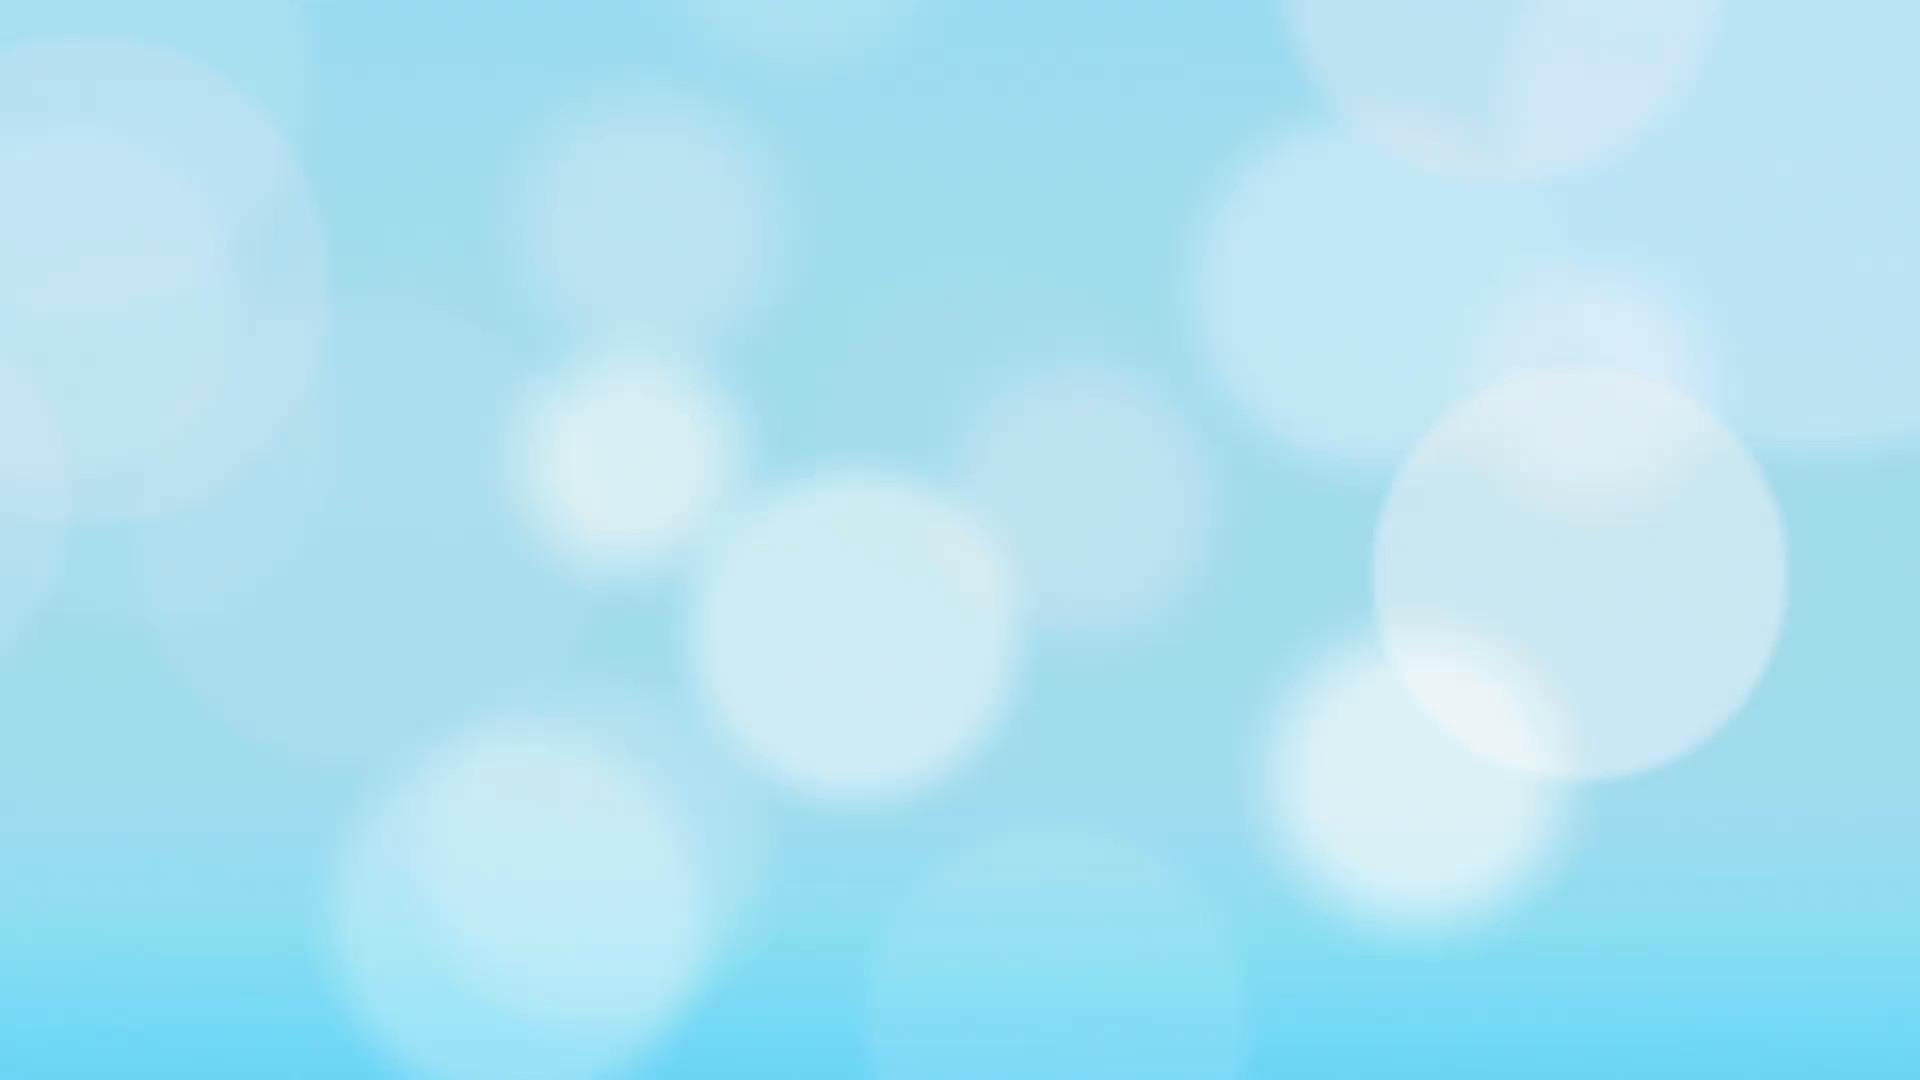 1920x1080 Subscription Library Abstract blue wallpaper with soft circles floating  slowly, loop